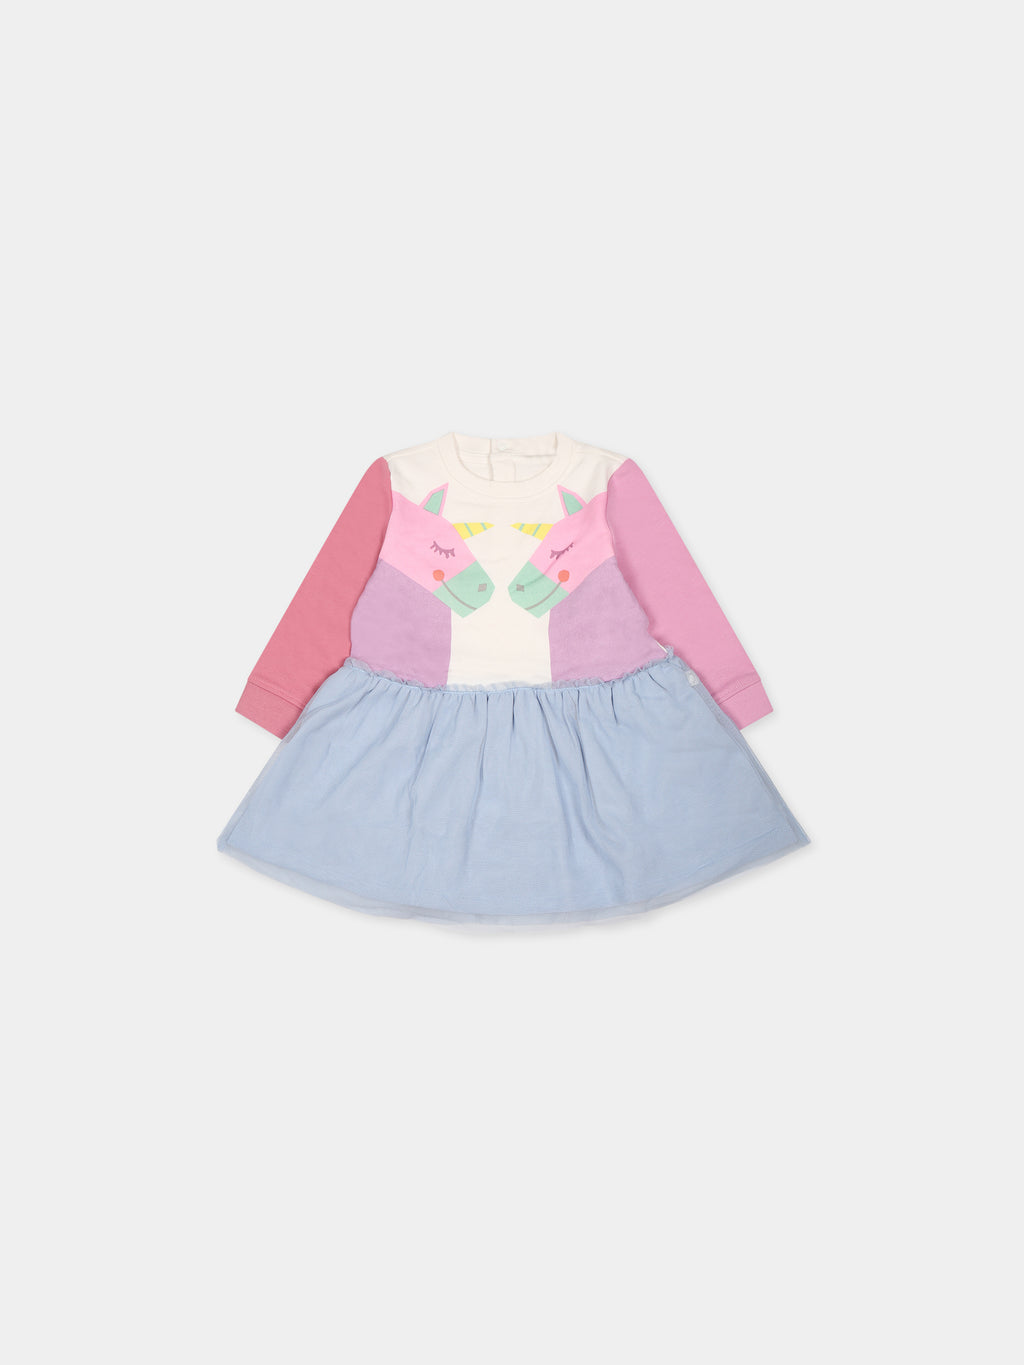 Multicolor dress for baby girl with unicorns